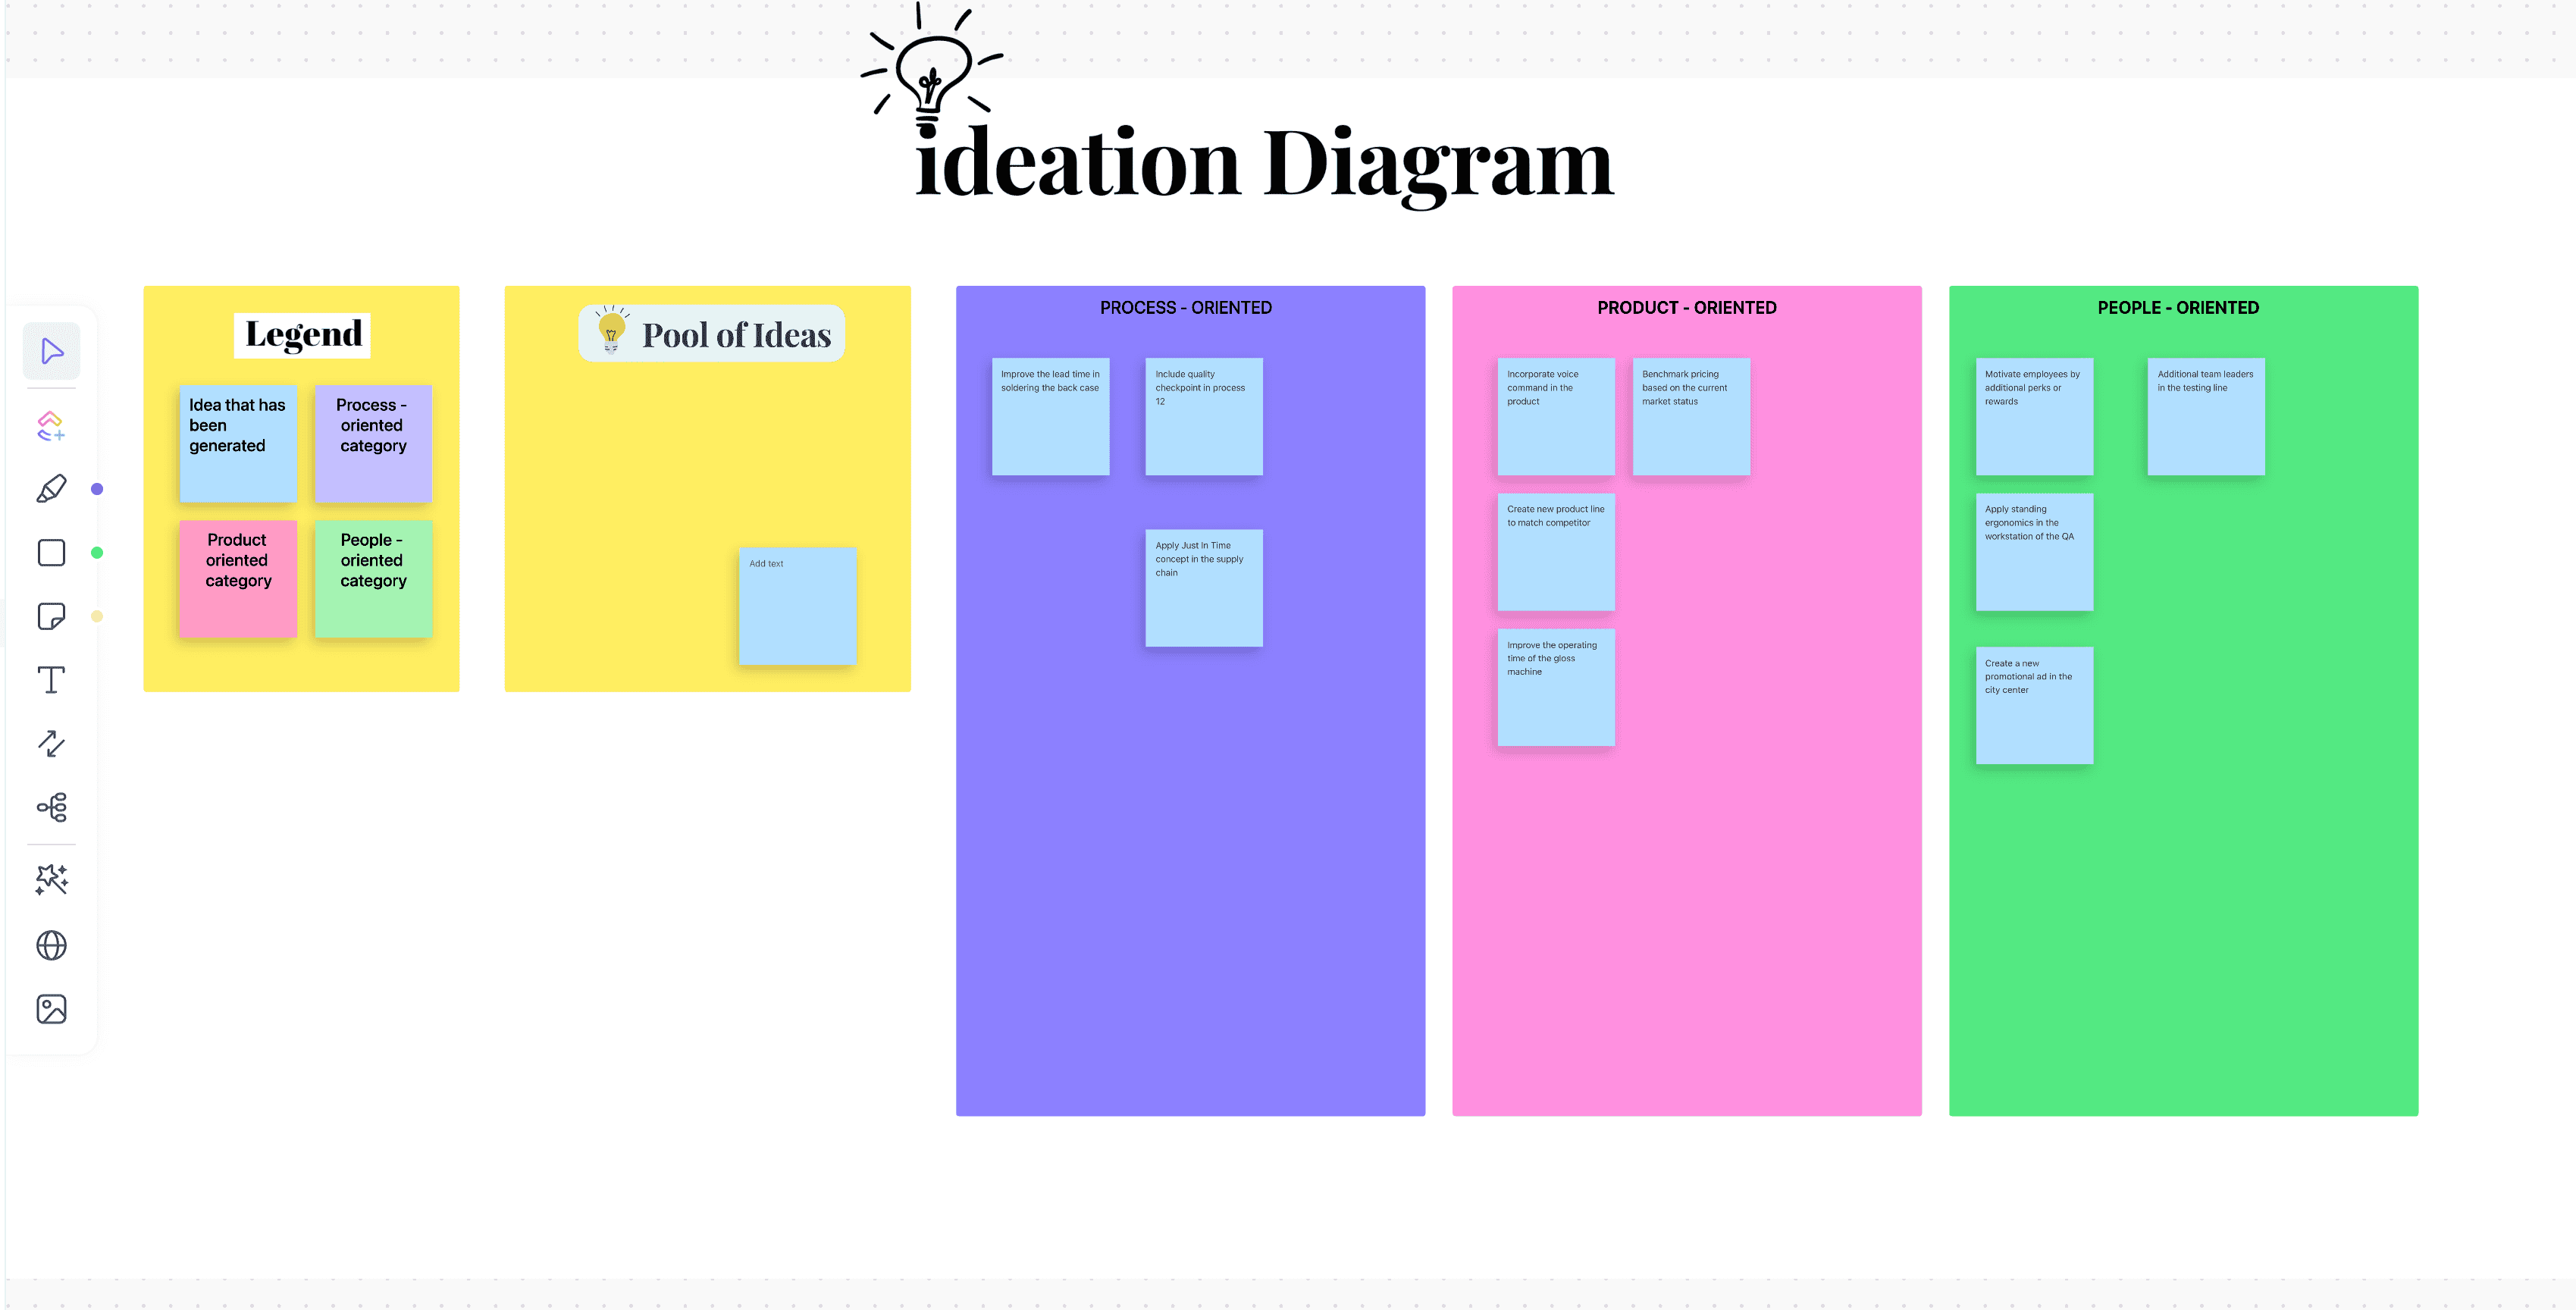 An Ideation Diagram is an example of visual aid that helps categorize all the input or ideas that are being presented. It is useful for use during brainstorming or group discussion.